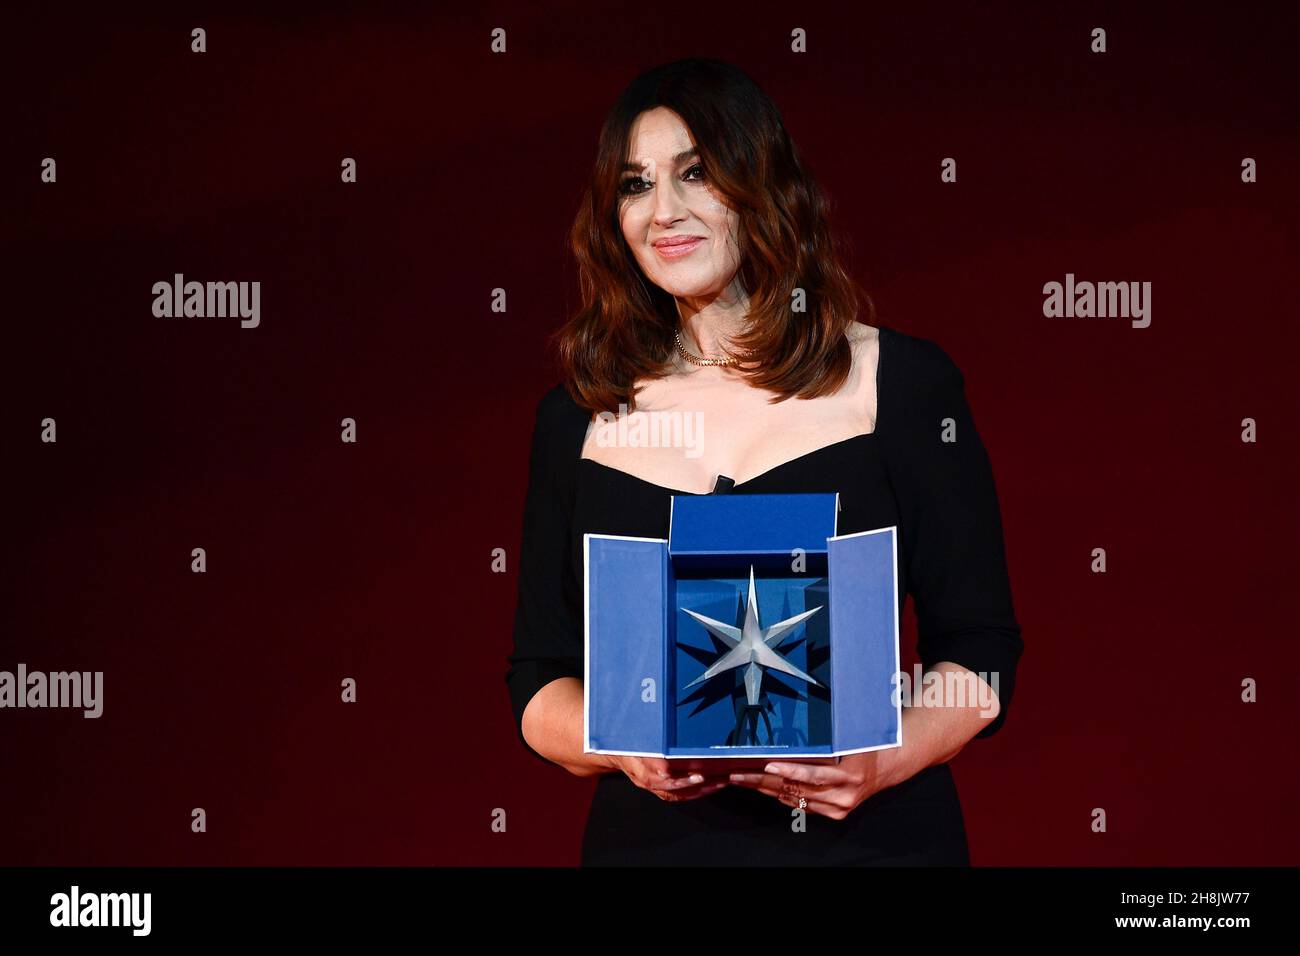 Turin, Italy. 30 November 2021. Monica Bellucci holds the award during a ceremony to celebrate the actress with the Stella della Mole Award ('Star of Mole') for artistic innovation. Credit: Nicolò Campo/Alamy Live News Stock Photo